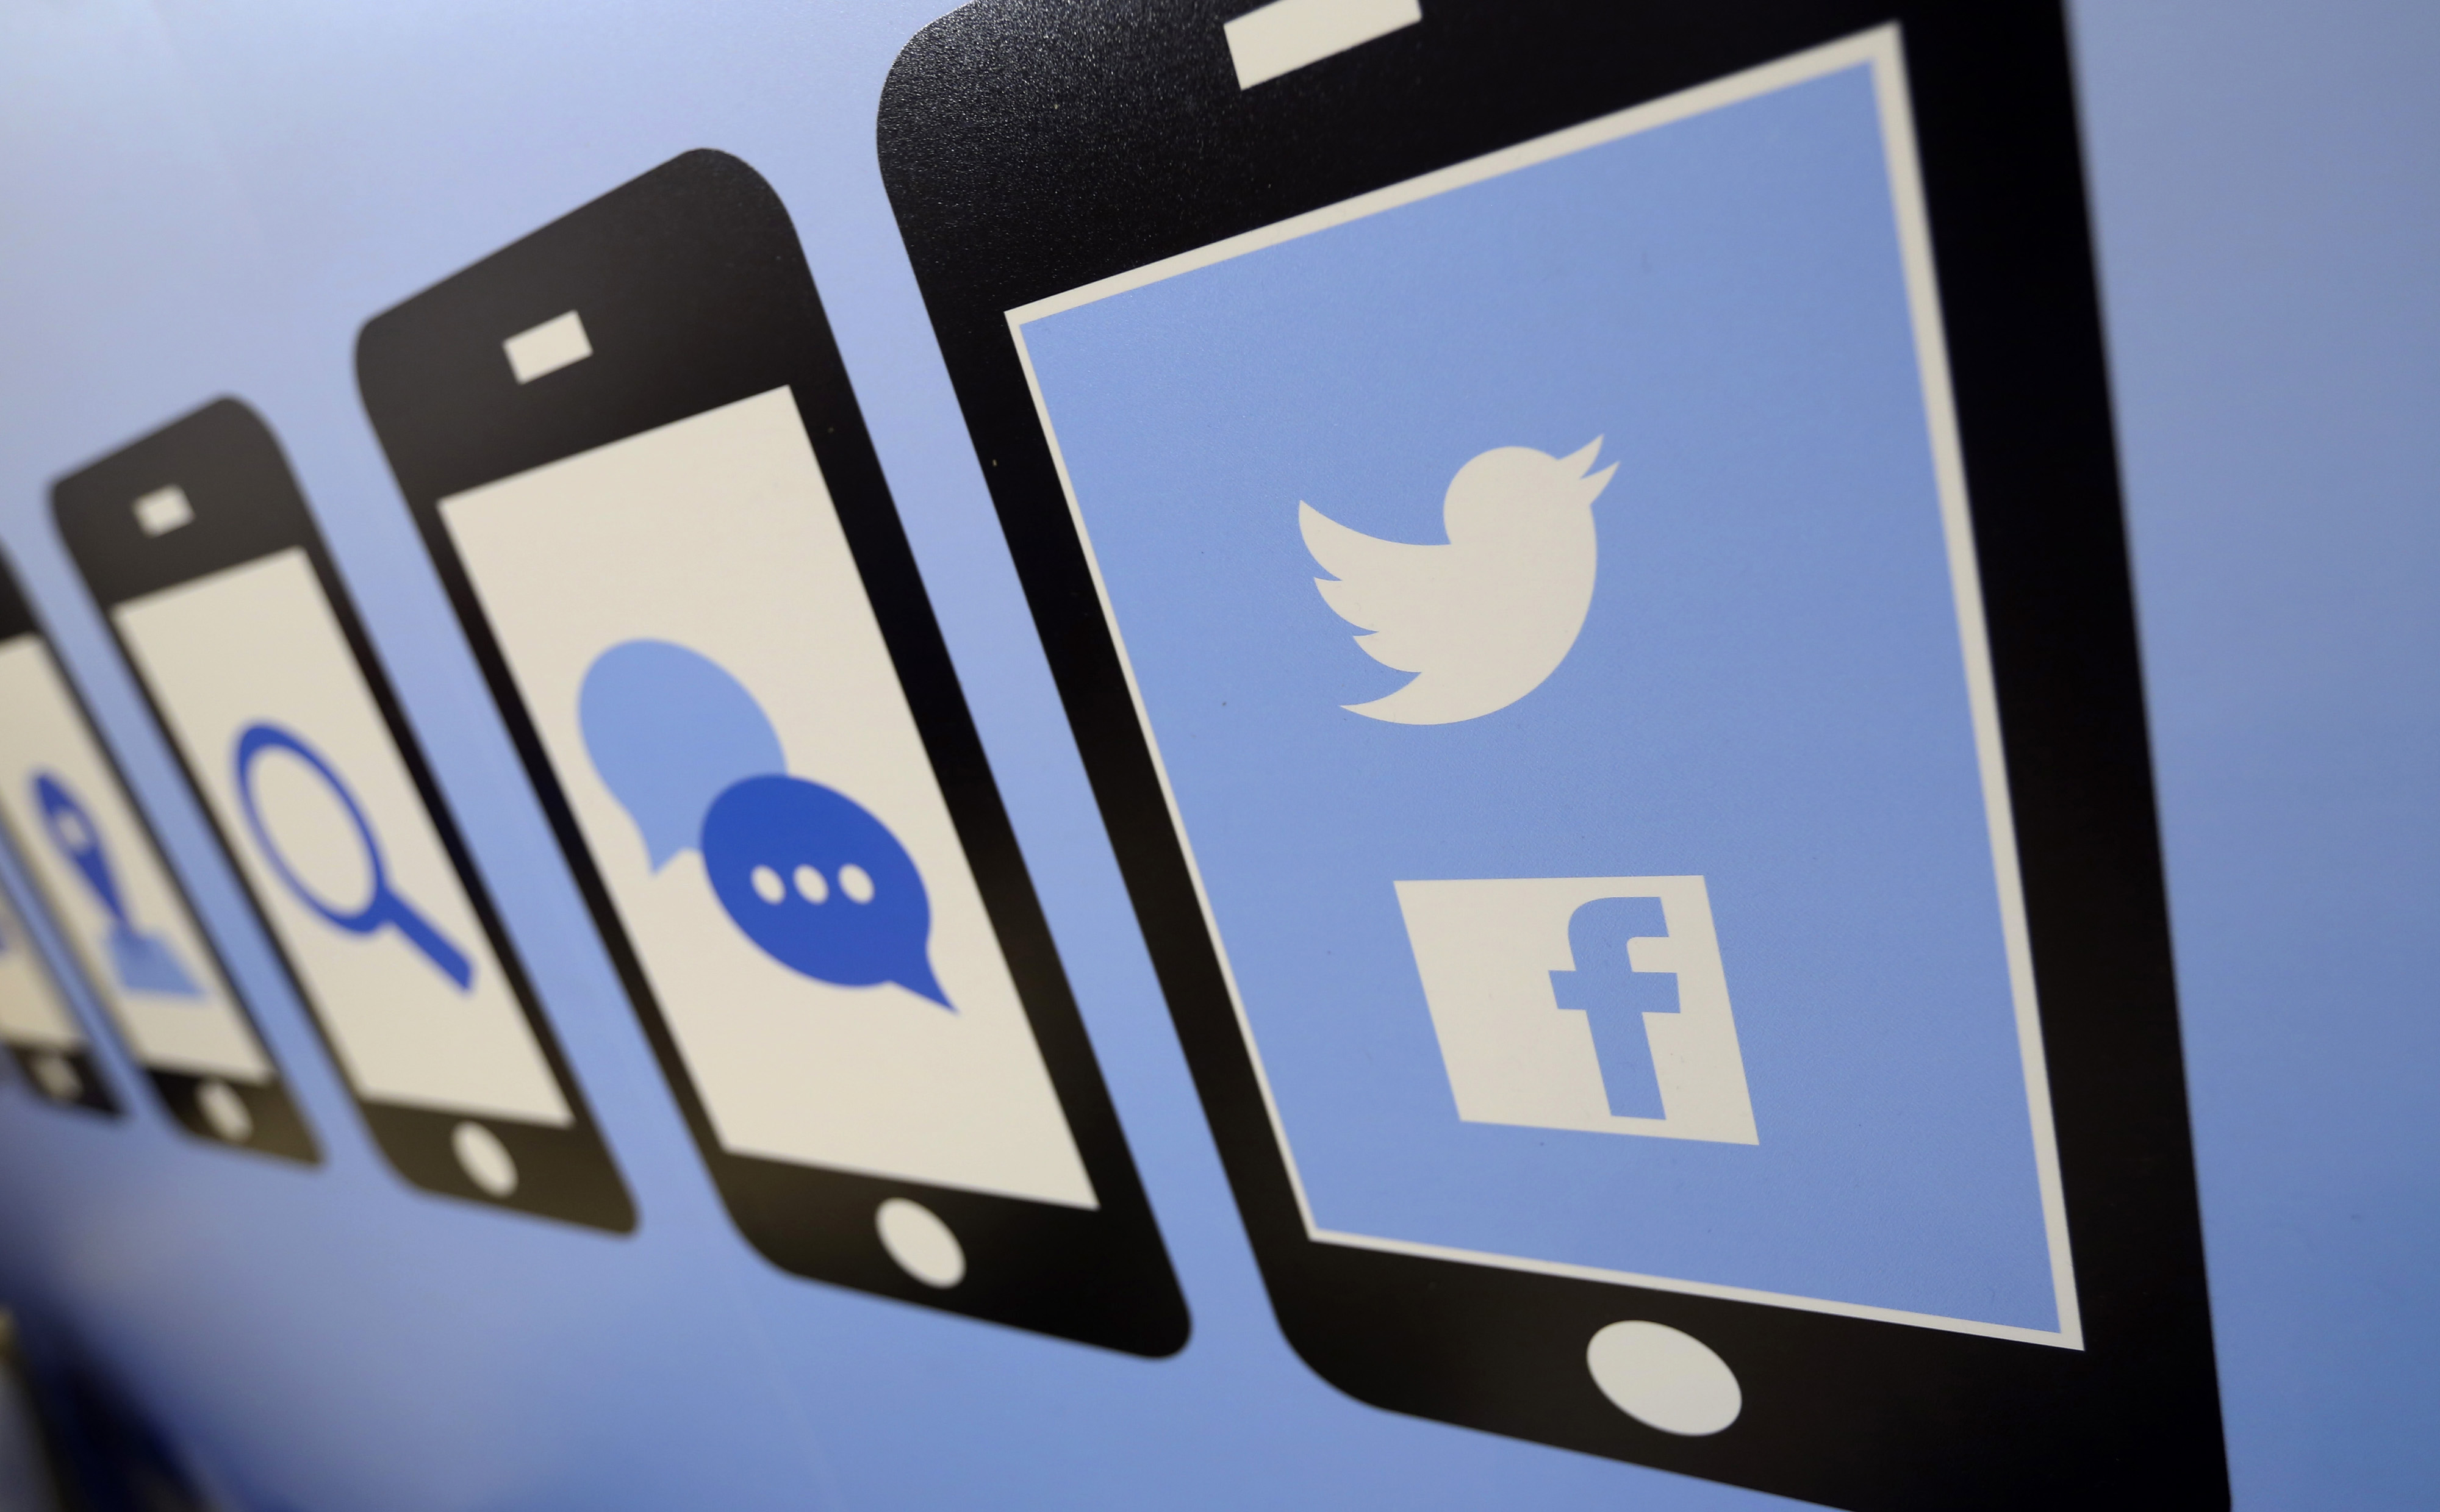 The Facebook Inc. and Twitter Inc. company logos are seen on an advertising sign during the Apps World Multi-Platform Developer Show in London, U.K., on Wednesday, Oct. 23, 2013. (Bloomberg/Getty Images)